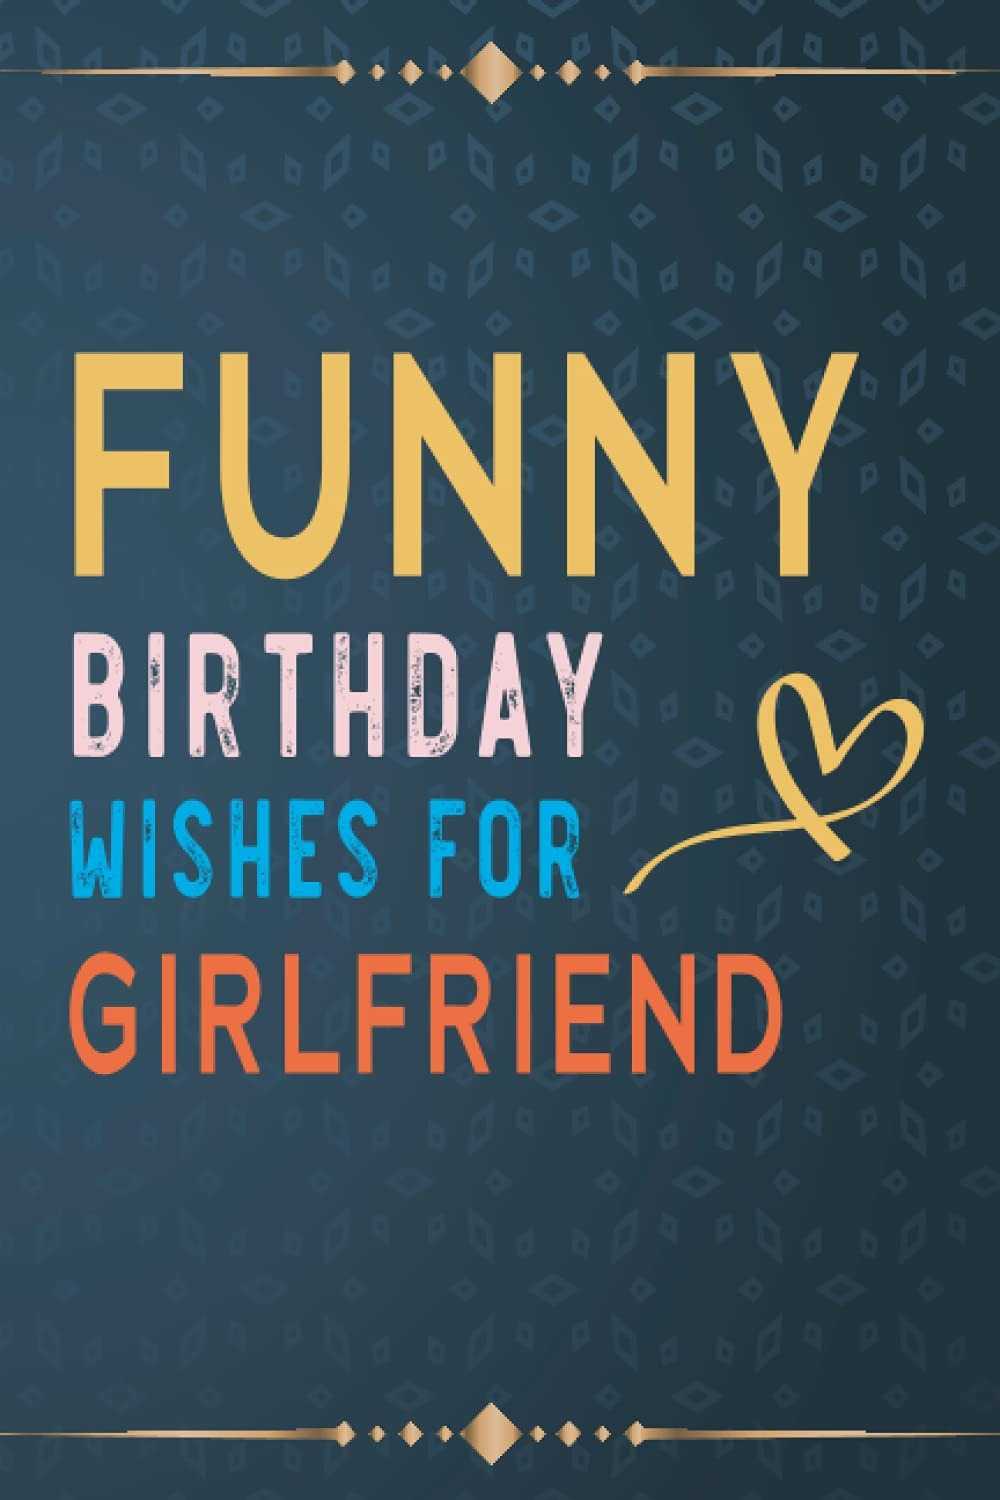 The Funniest Birthday Wishes For Your Girlfriend - Six Minute Dates